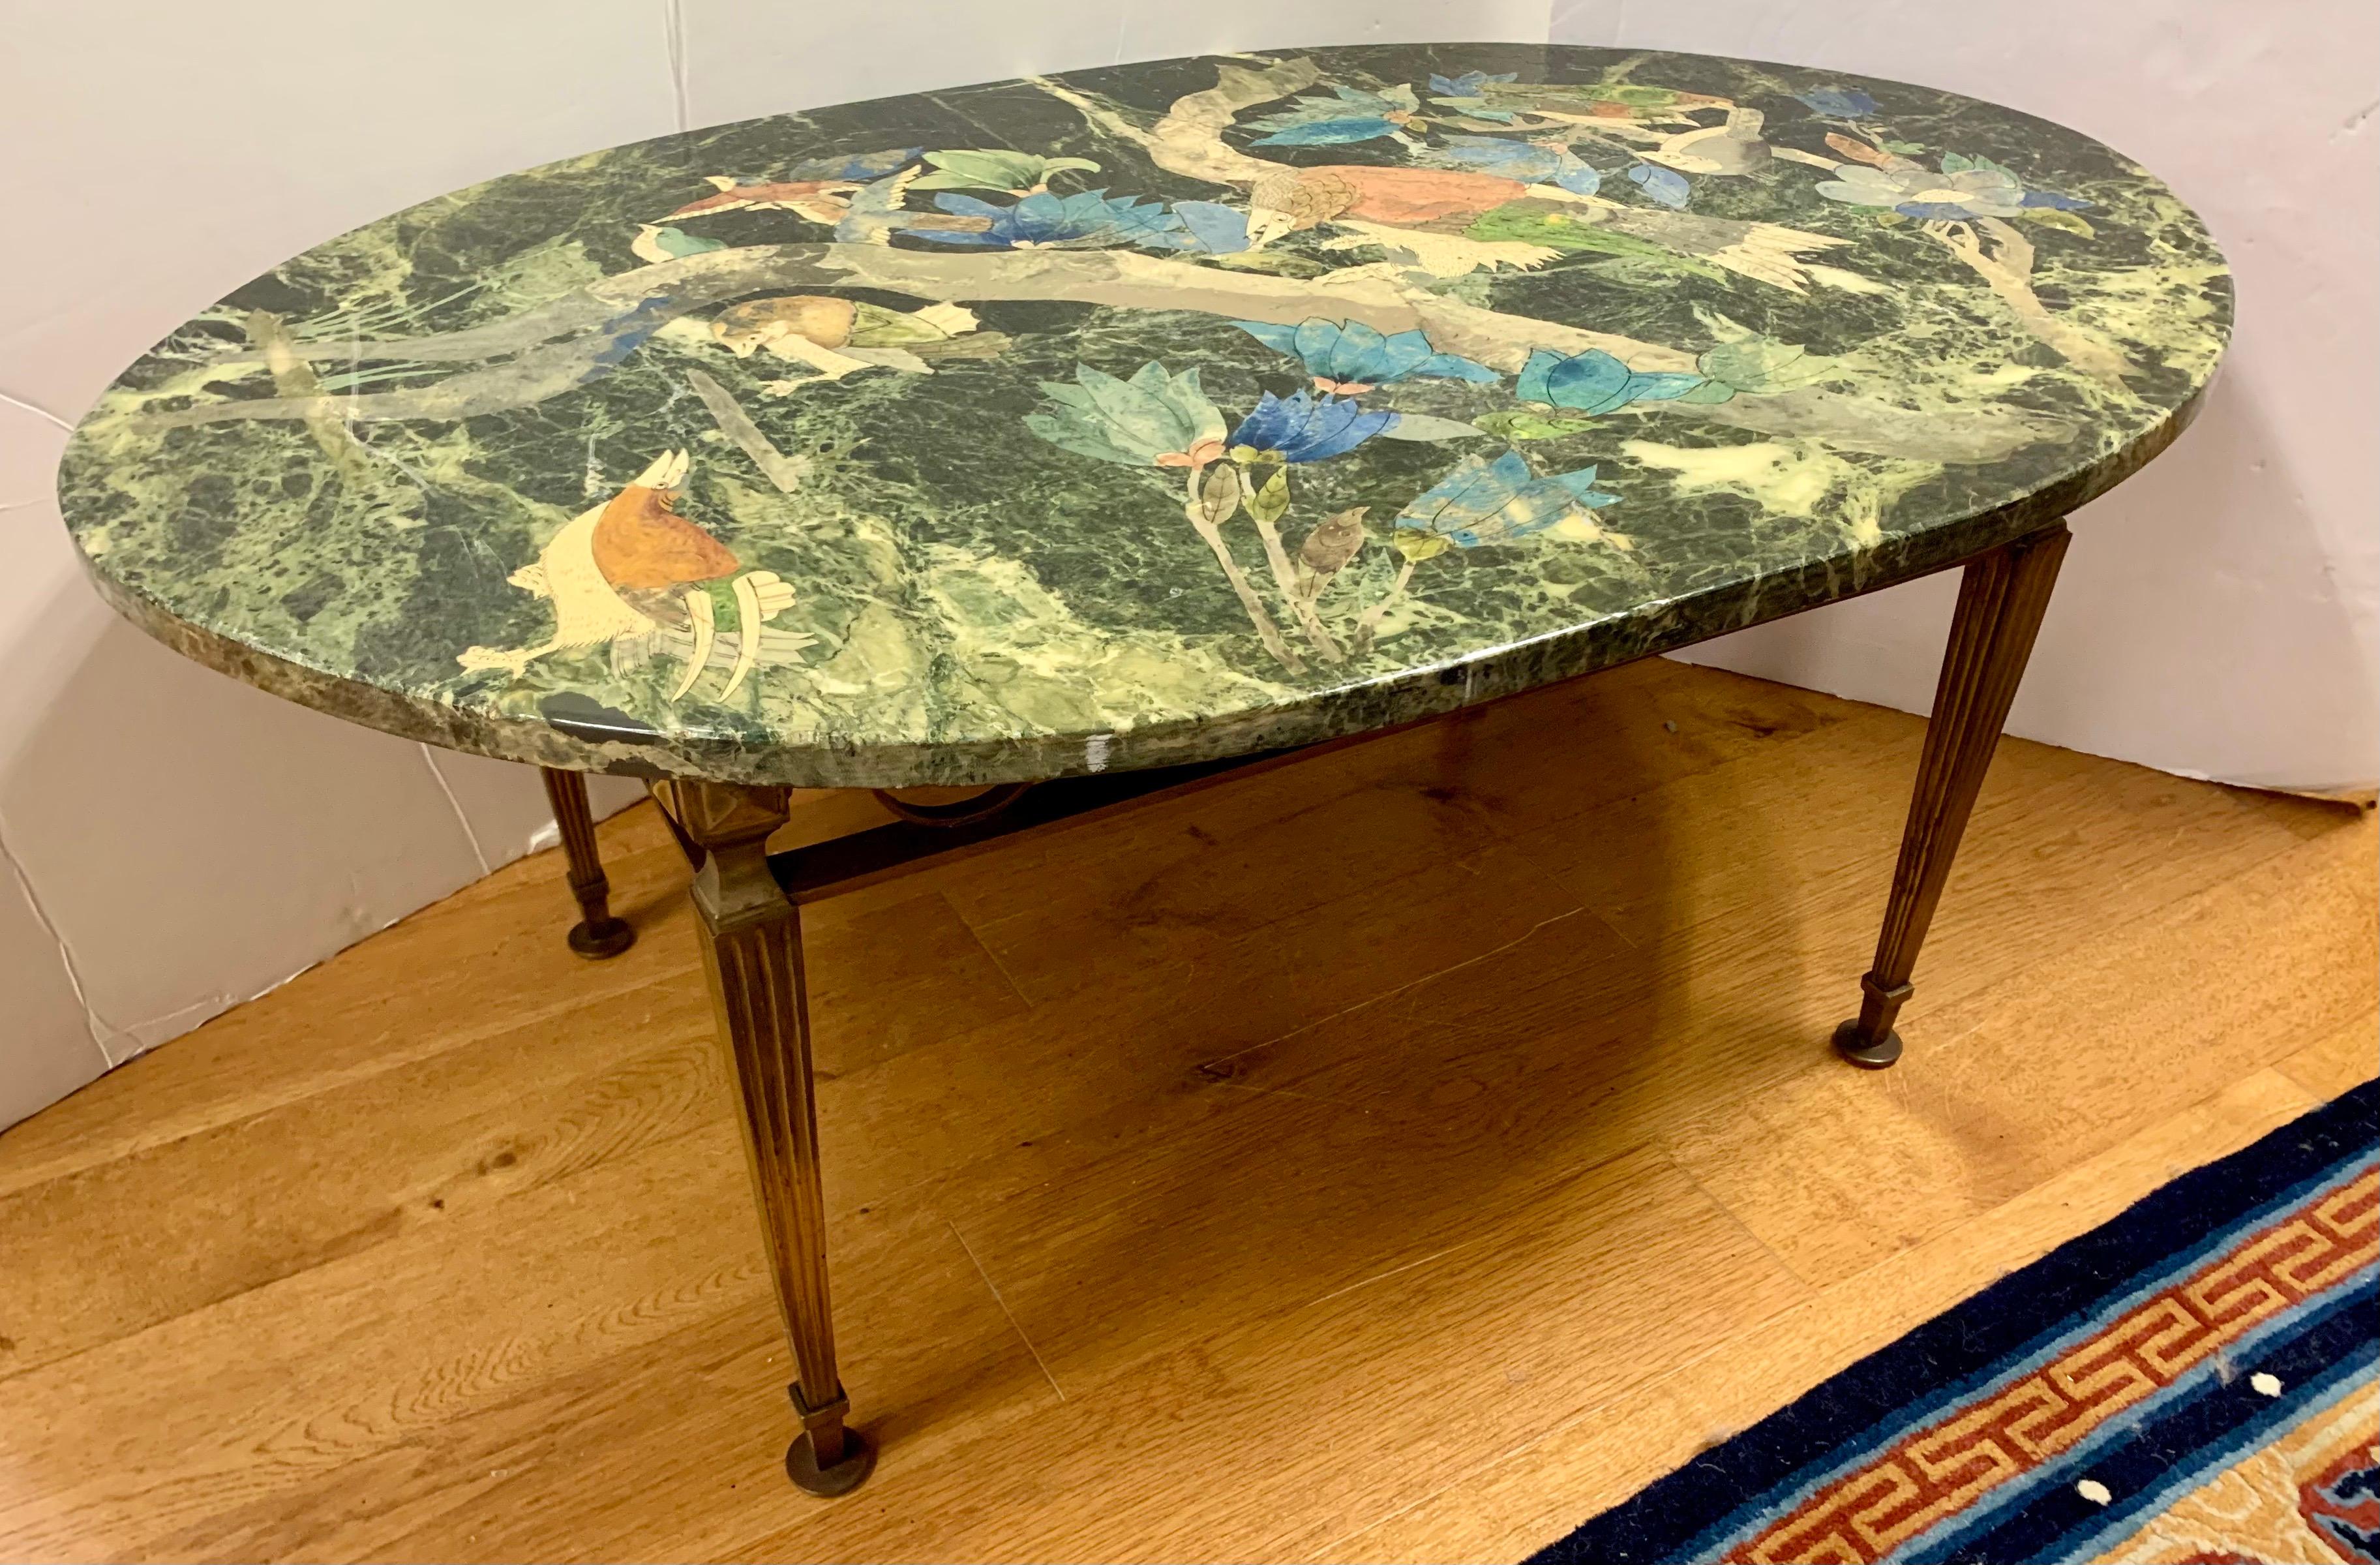 Stunning one-of-a-kind Italian scagliola marble table top hand painted with a motif of depicting various colorful birds perched on tree branches mounted on a bronze base.